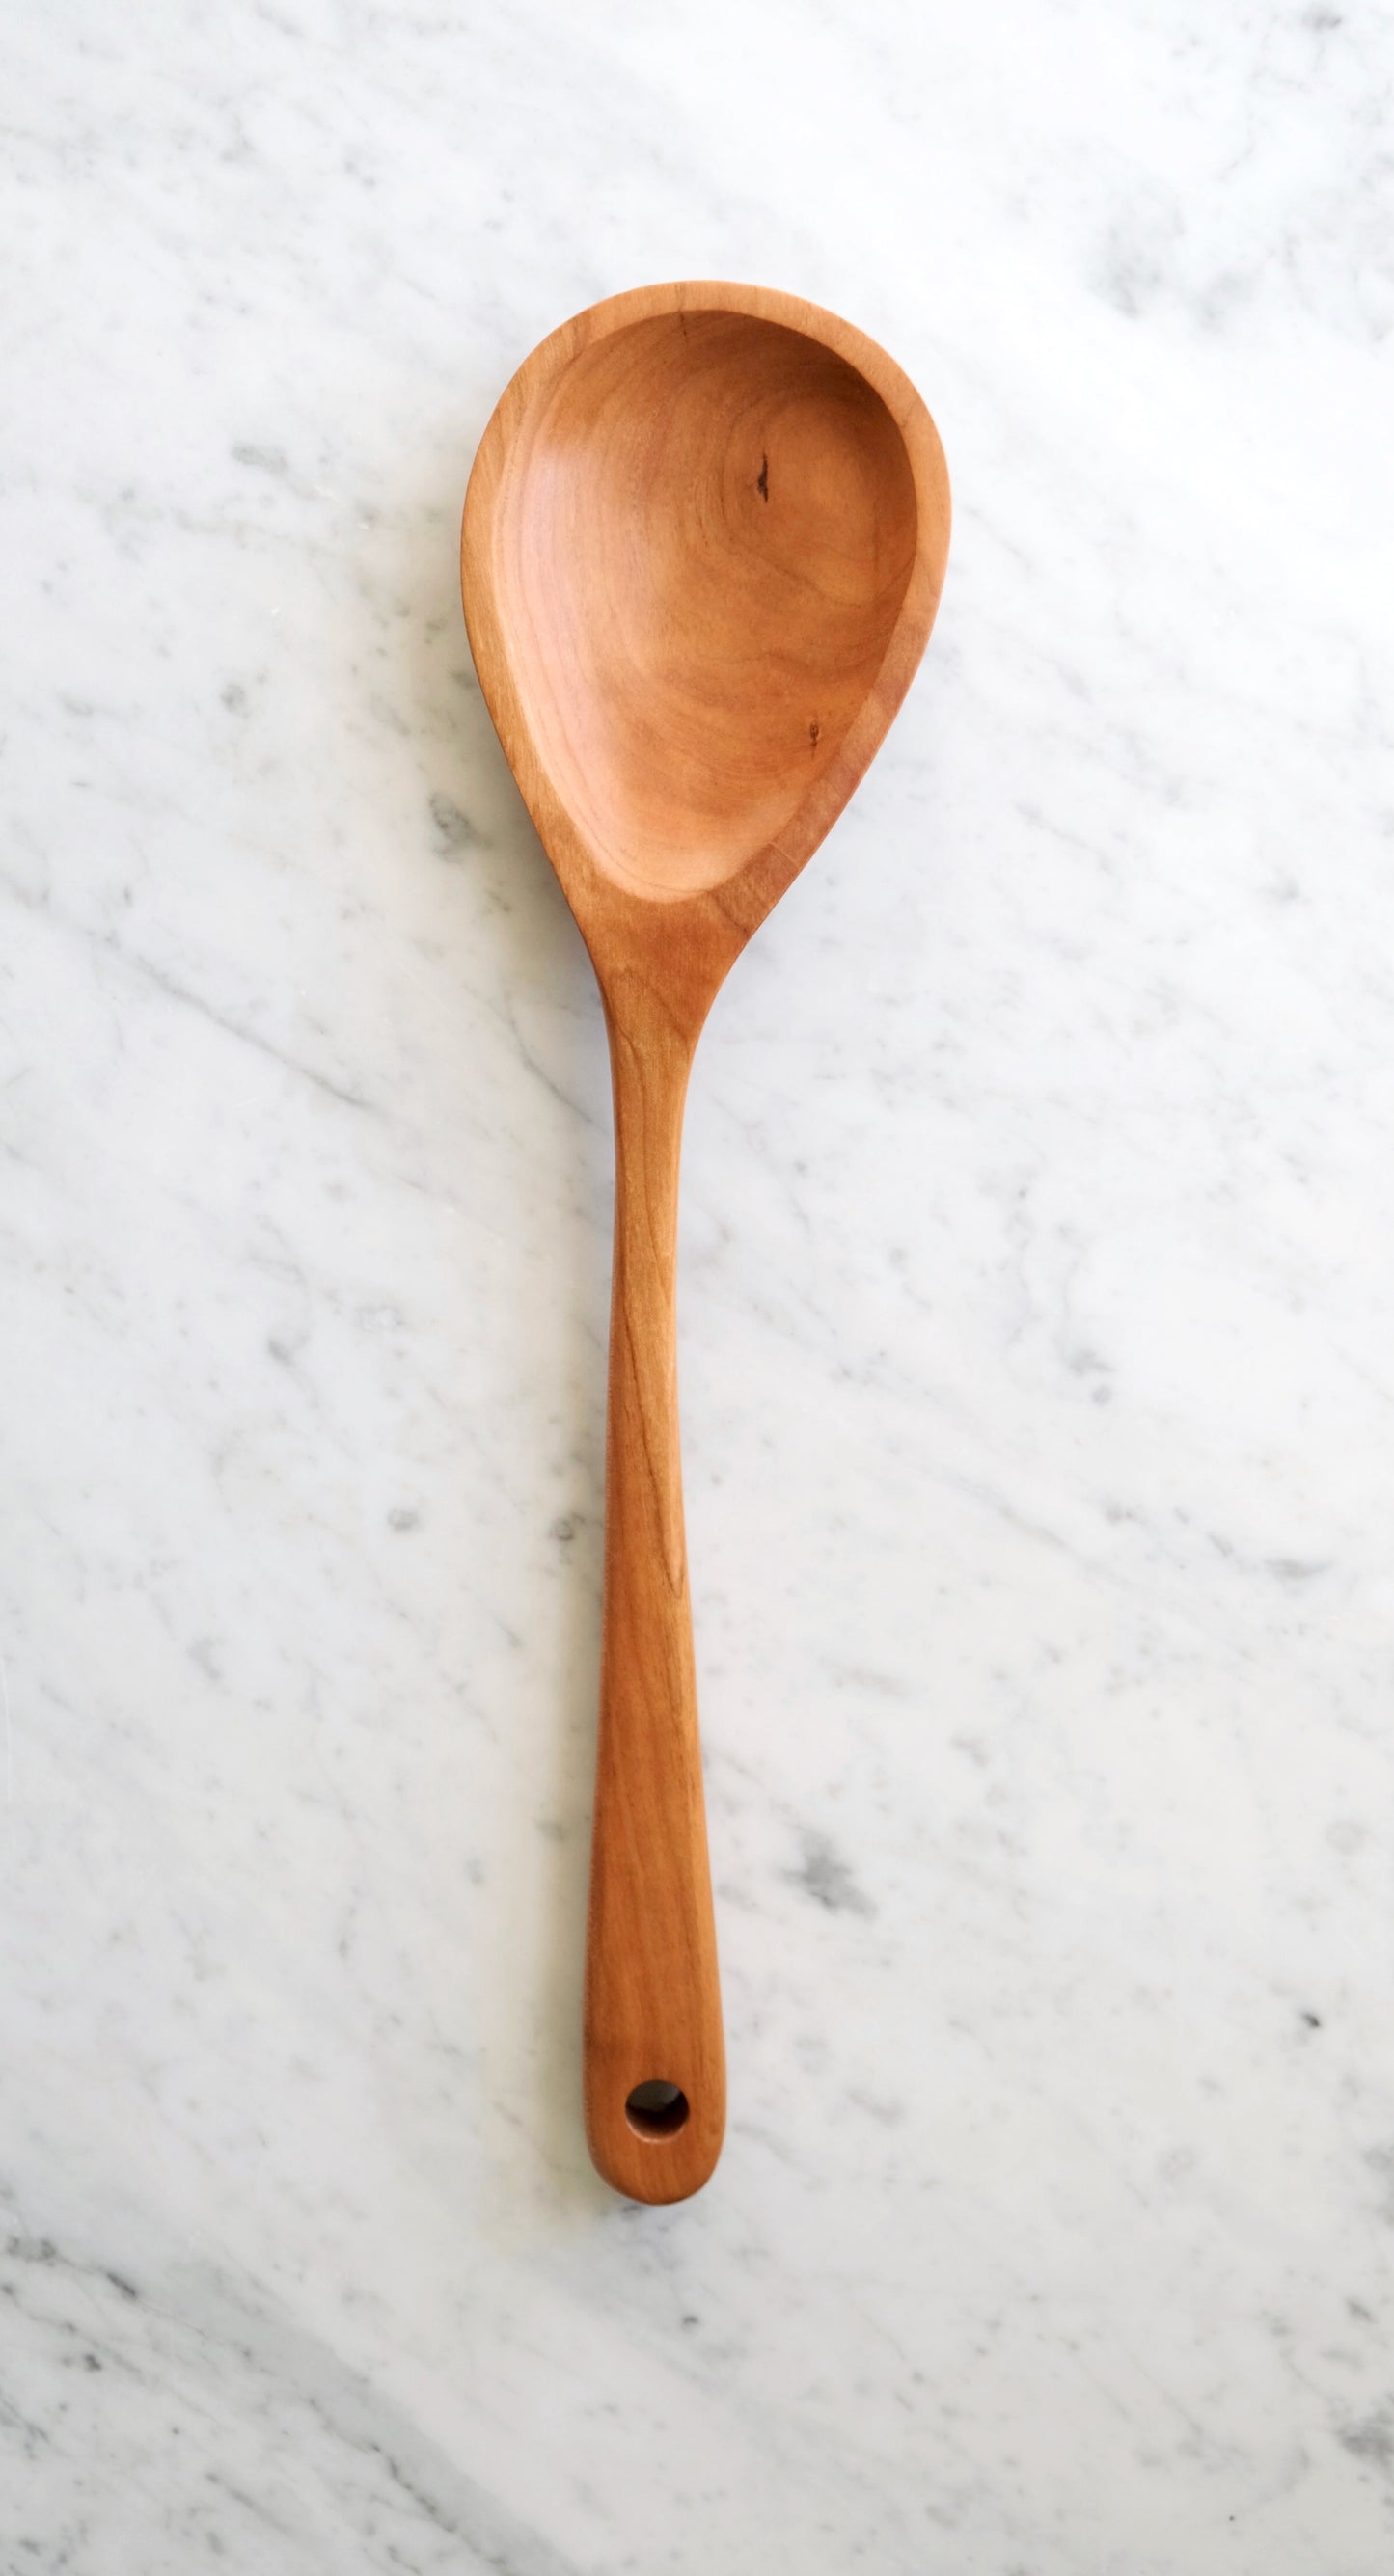 Hand-Carved Wooden Pan Spoon